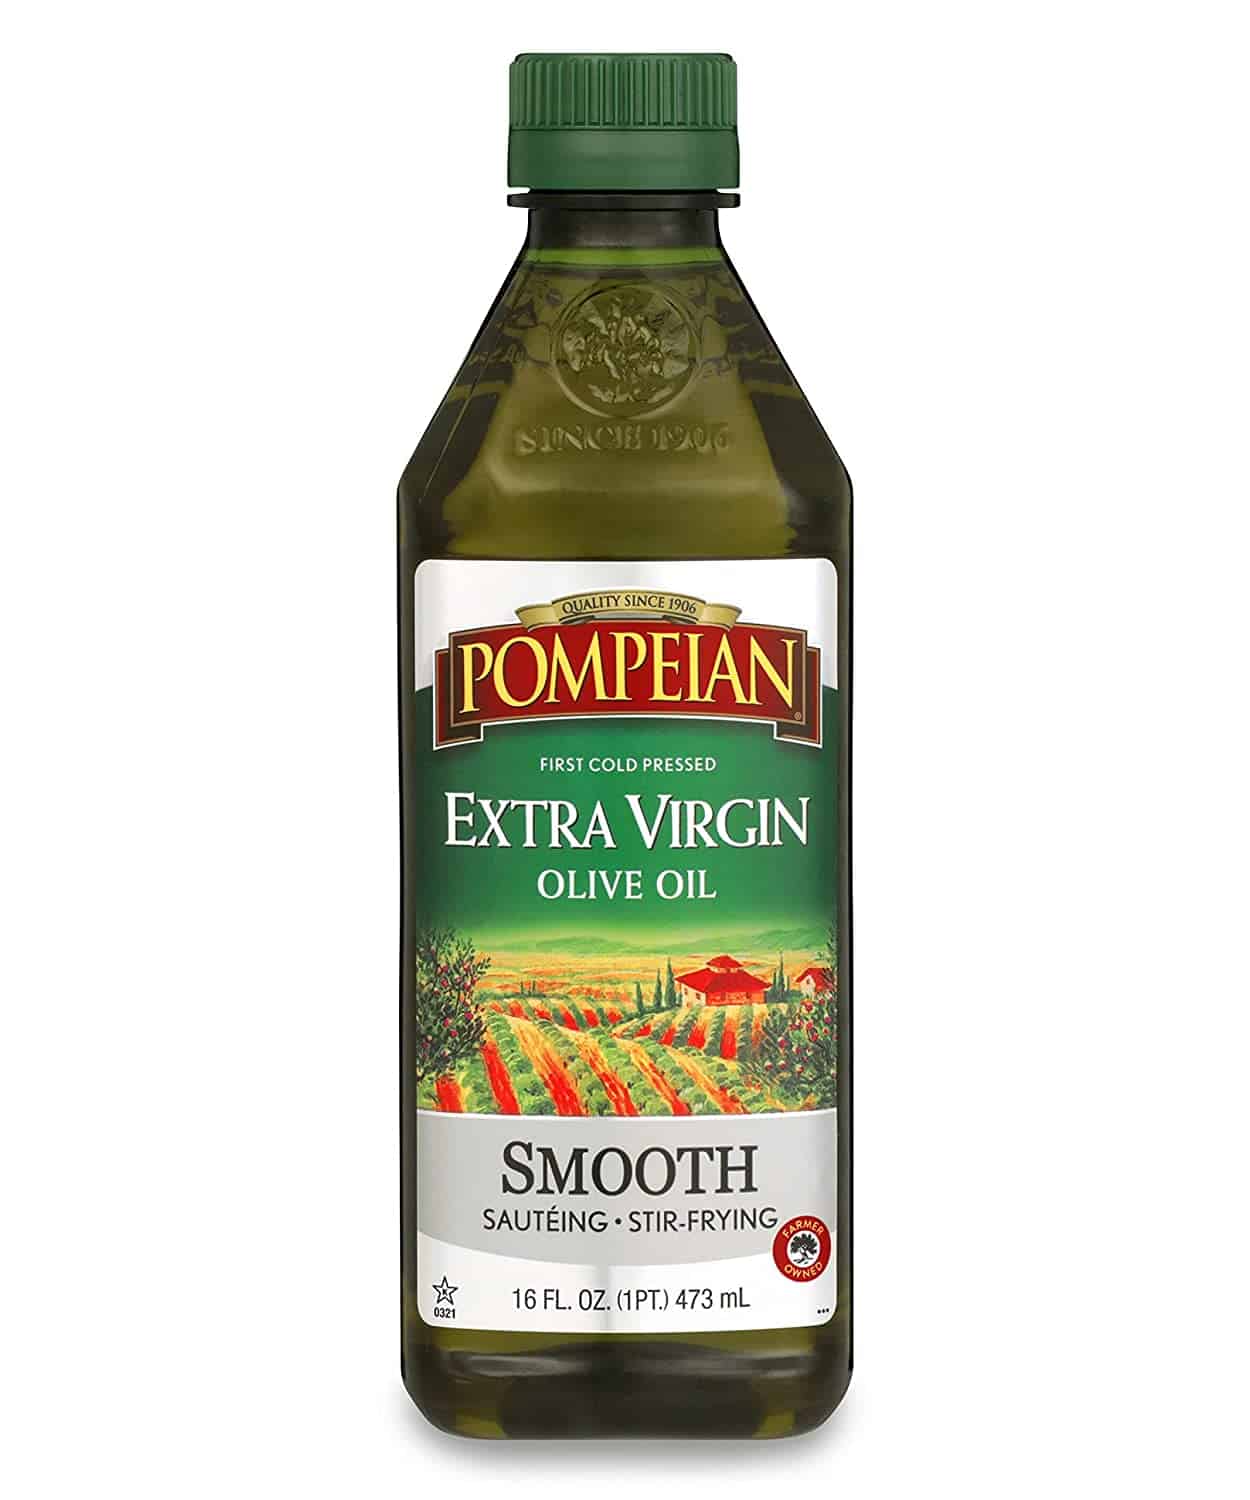 Pompeian Smooth Extra Virgin Olive Oil, First Cold Pressed, Mild and Delicate Flavor